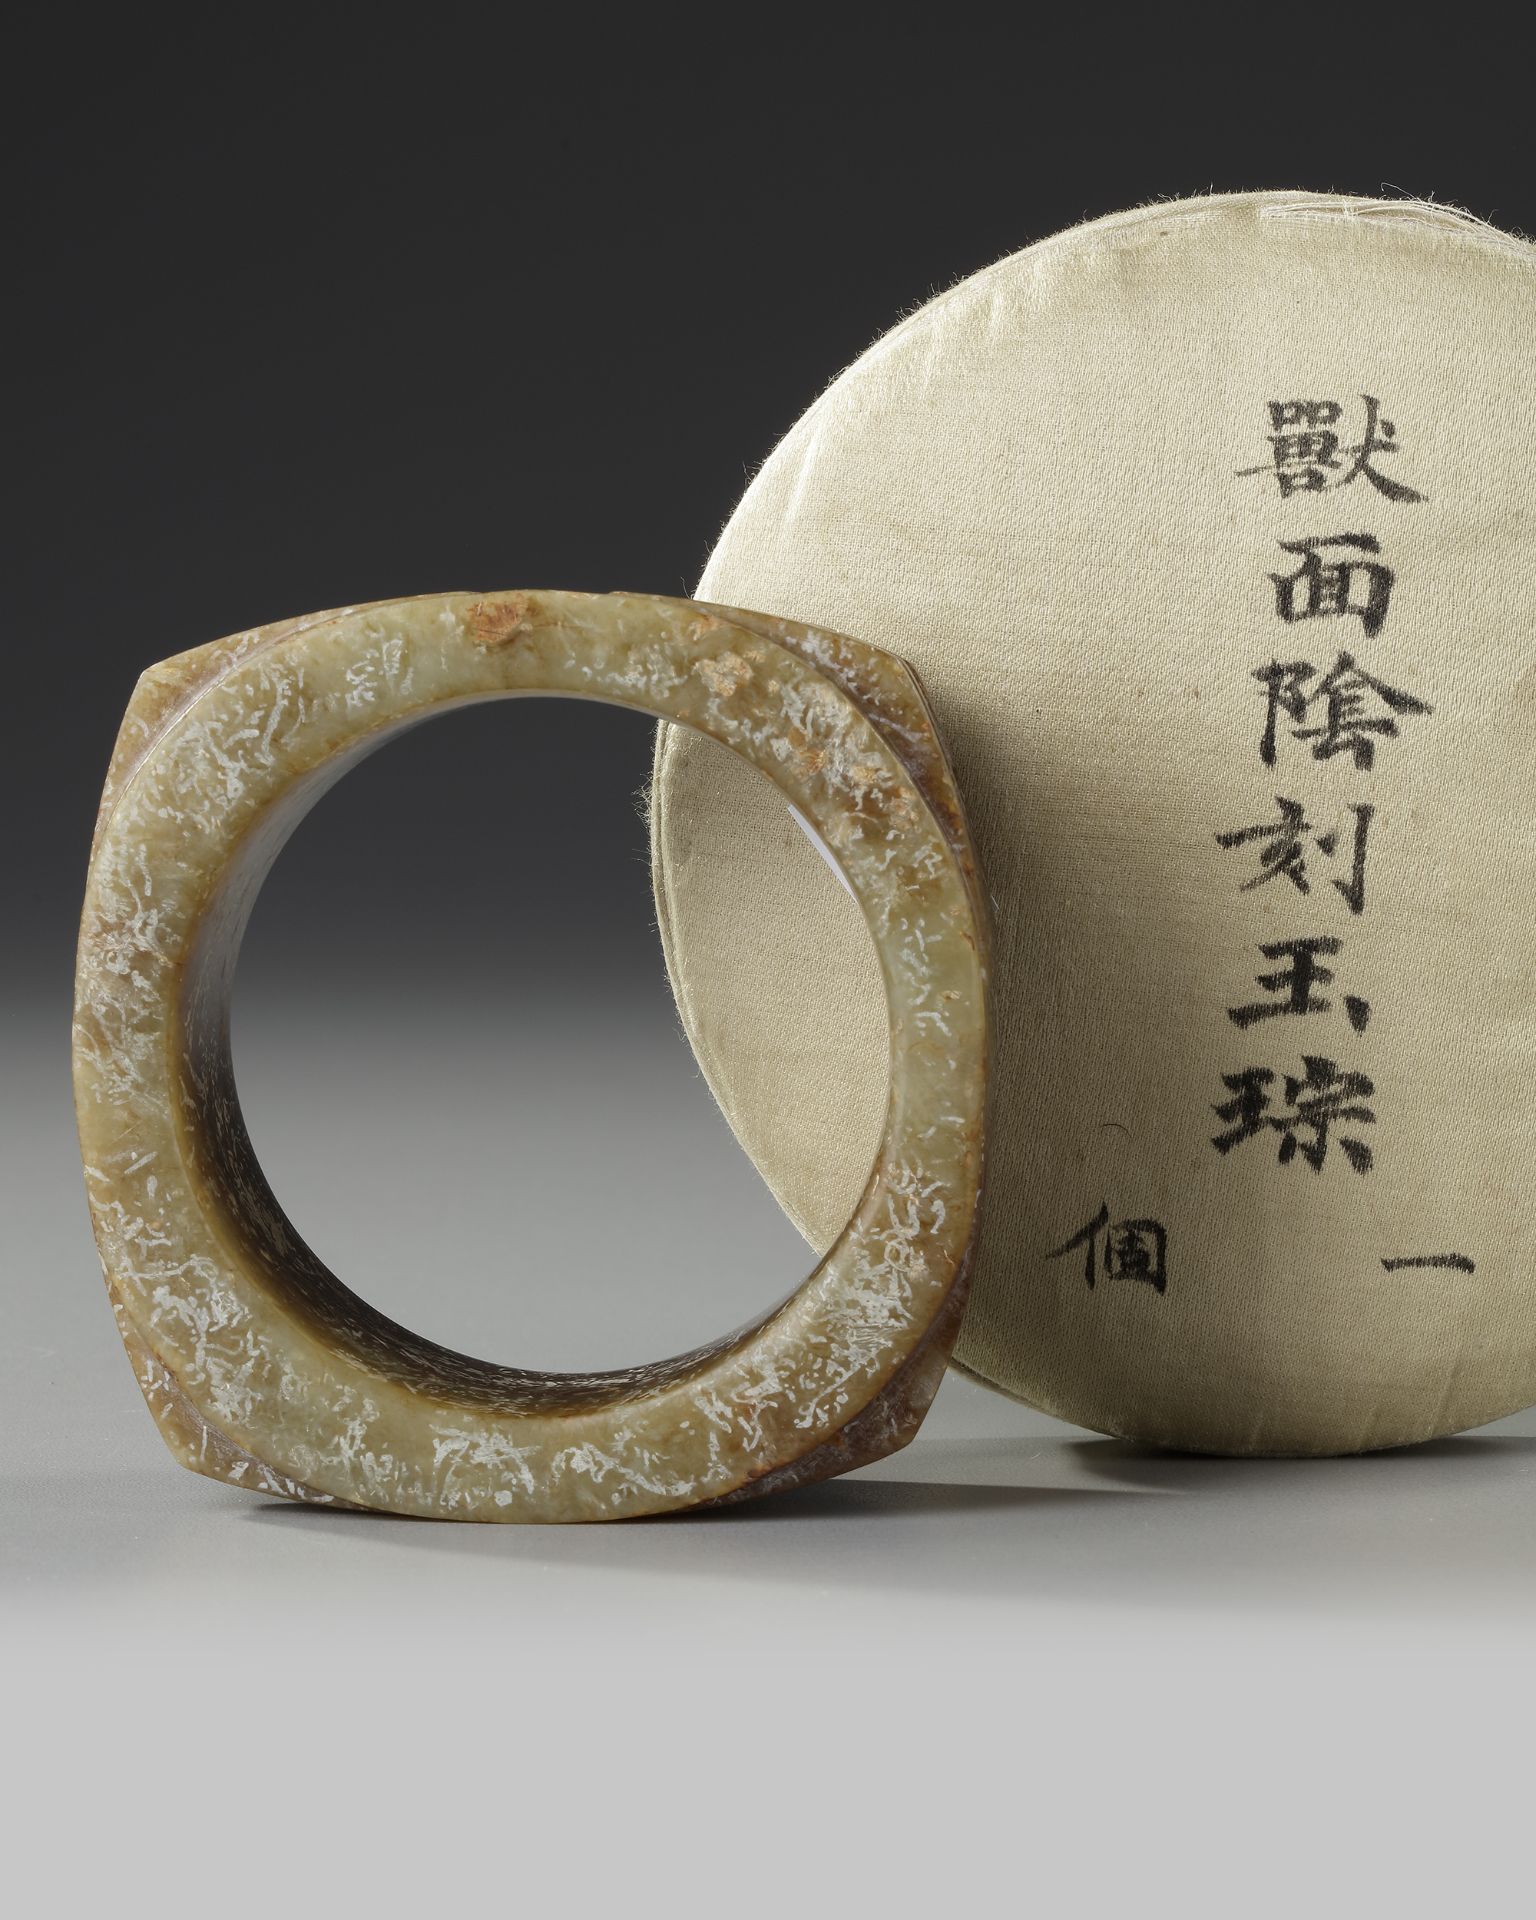 A LARGE ARCHAISTIC JADE CONG, MING DYNASTY (1368-1644) - Image 8 of 8